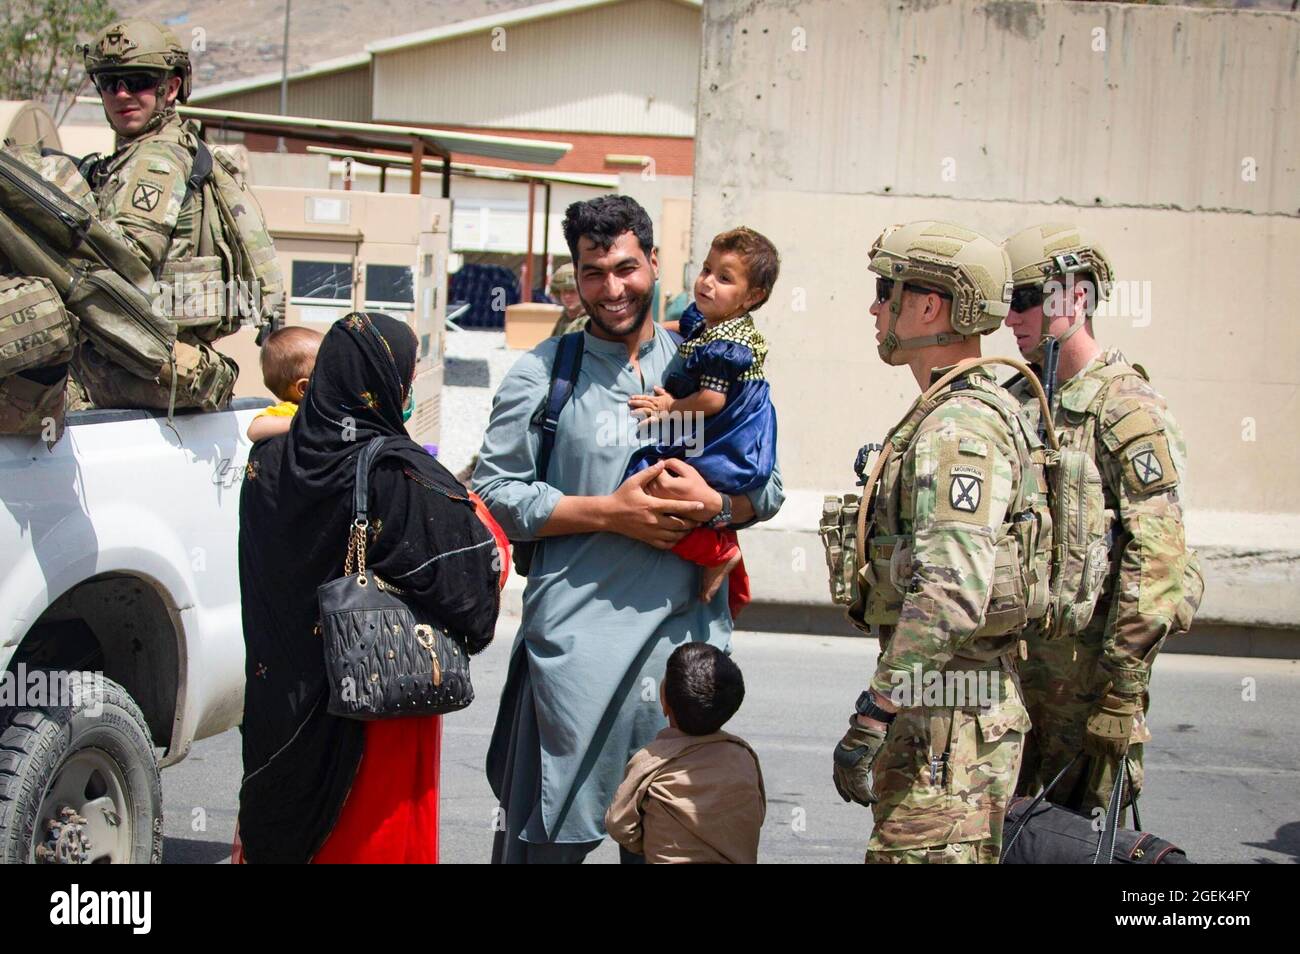 Soldiers with the 10th Mountain Division escort evacuees at Hamid Karzai International Airport, Afghanistan, Aug. 20. U.S. service members are assisting the Department of State with a Non-combatant Evacuation Operation (NEO) in Afghanistan. (U.S. Marine Corps photo by Cpl. Davis Harris) Stock Photo